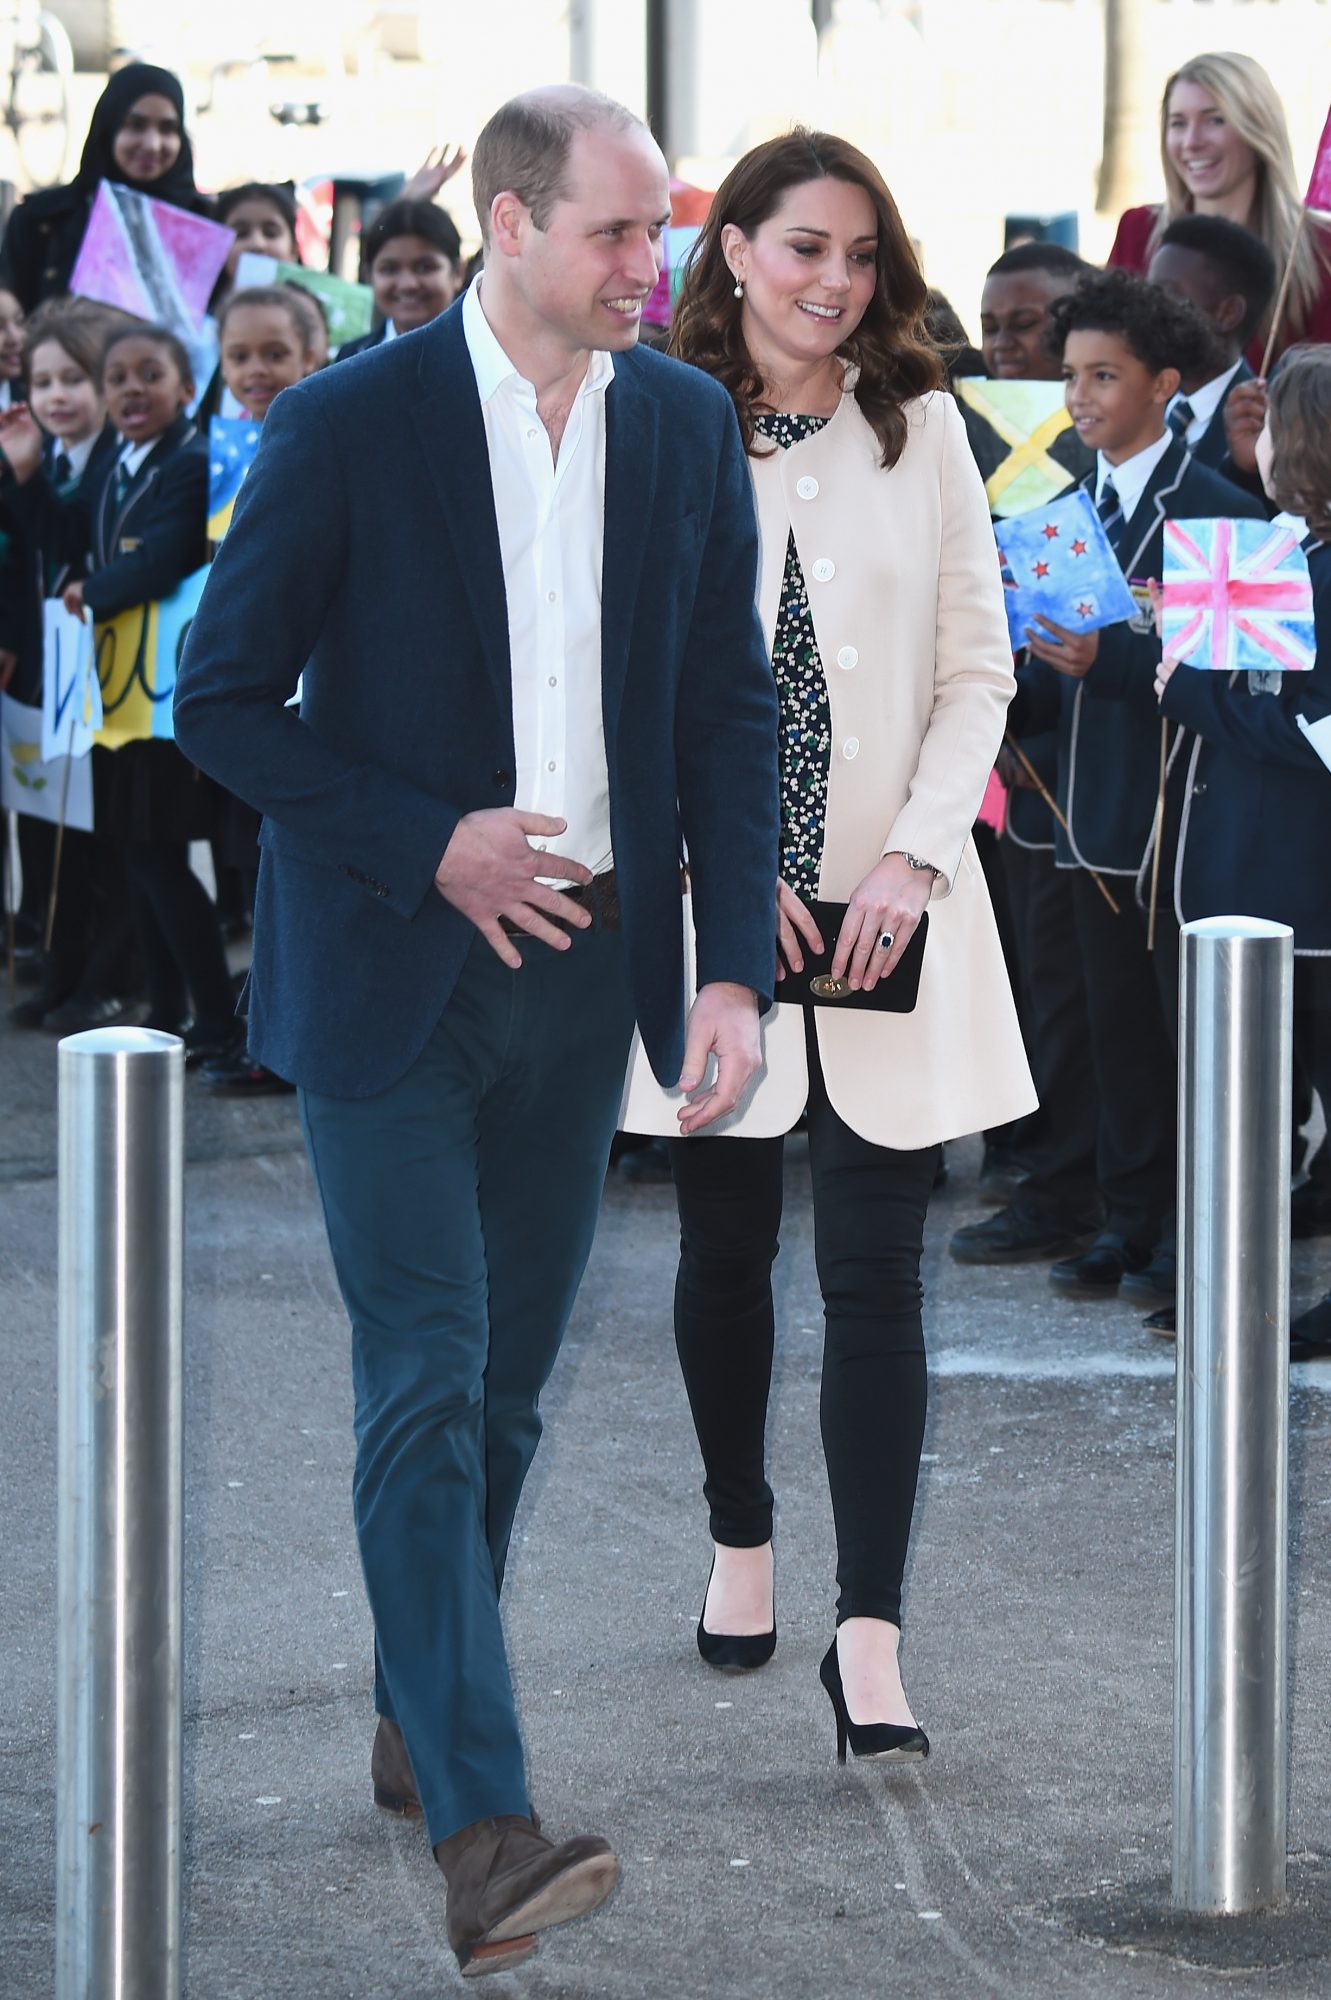 will-kate-last-appearance-third-baby.jpg